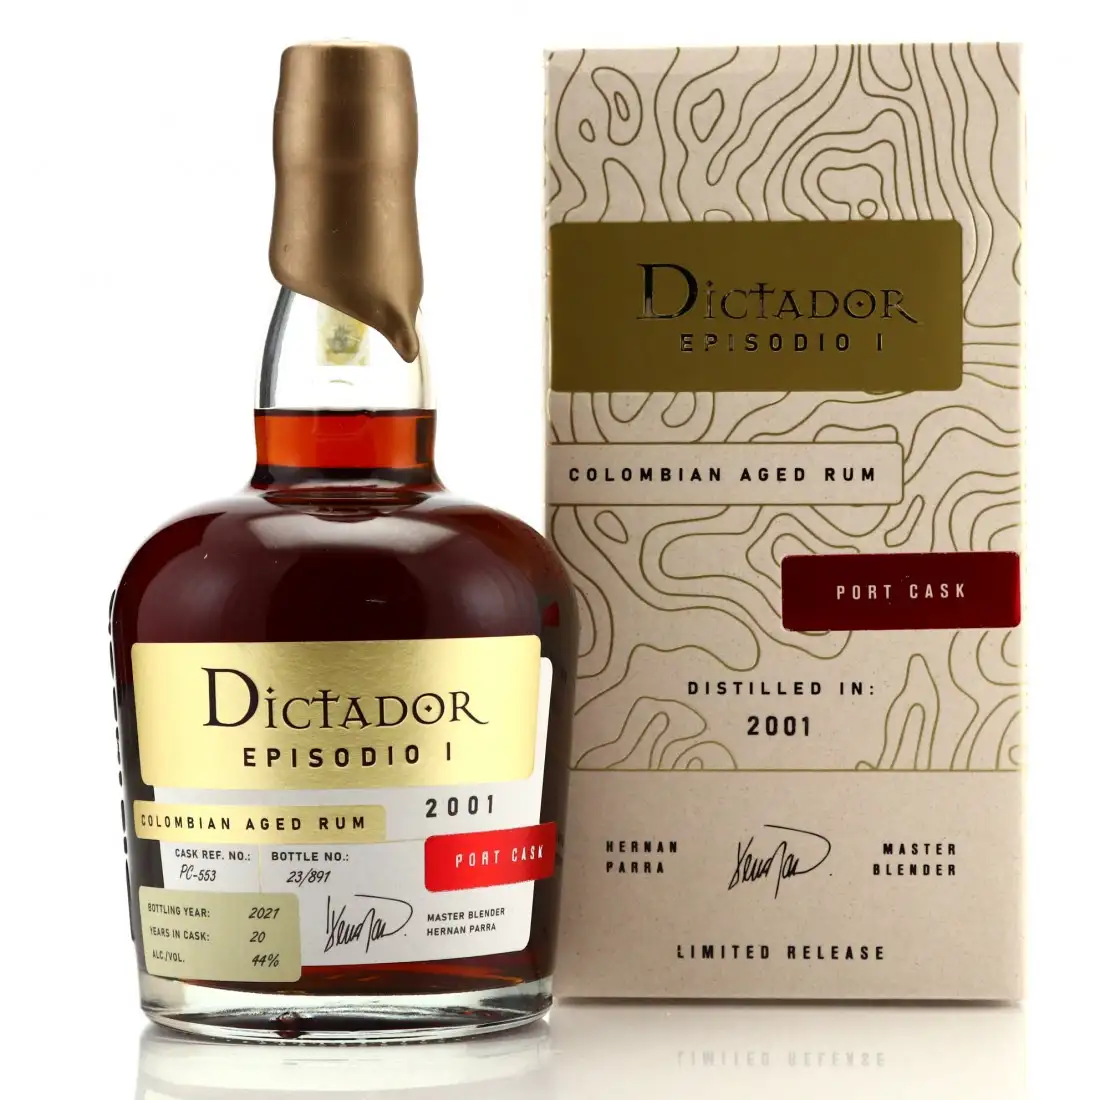 Image of the front of the bottle of the rum Dictador Episodio 1 Port Cask